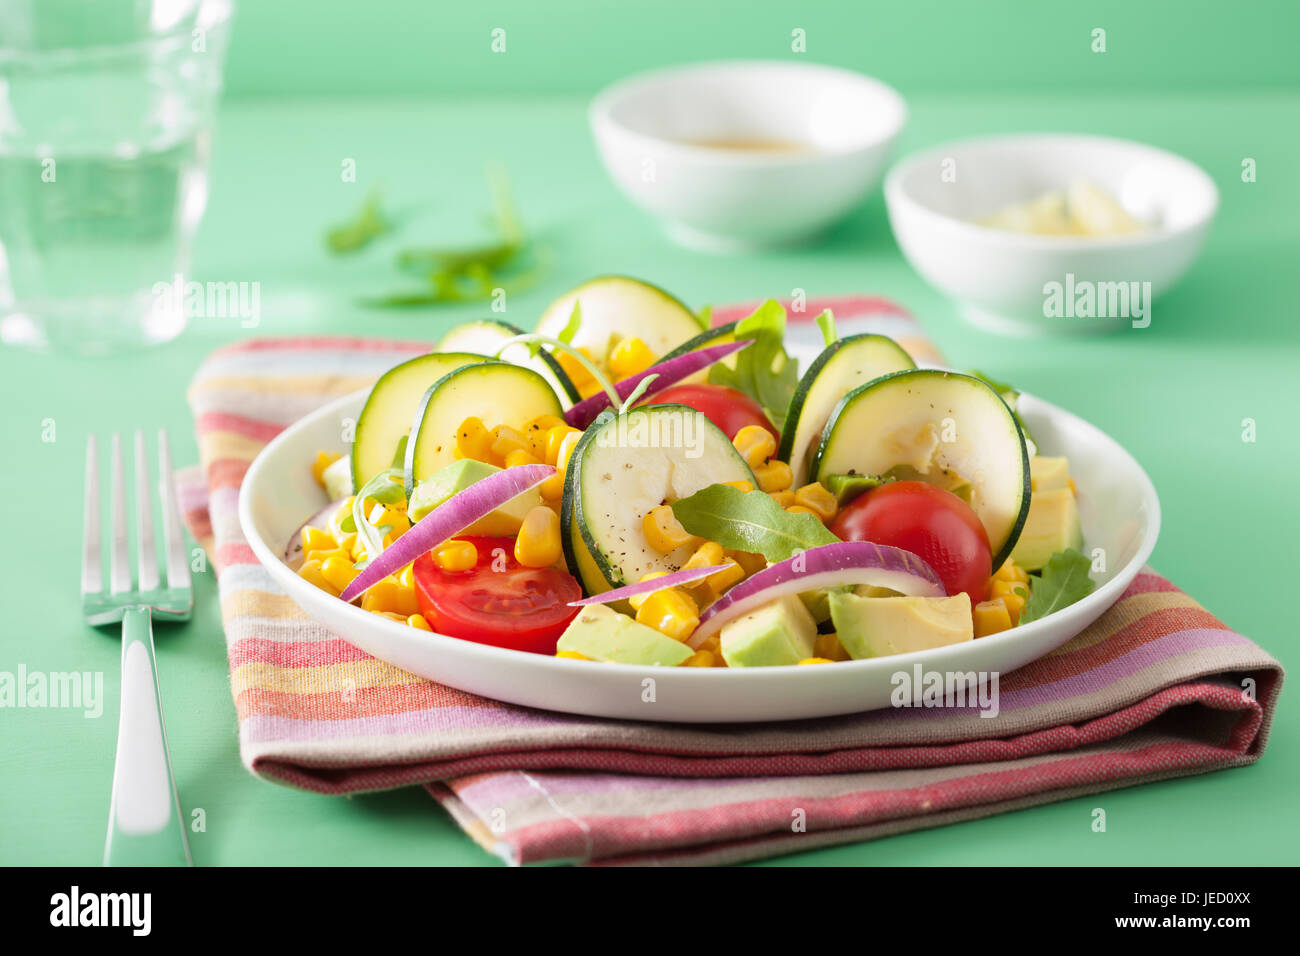 spiralized courgette salad with sweetcorn tomato avocado, healthy vegan meal Stock Photo